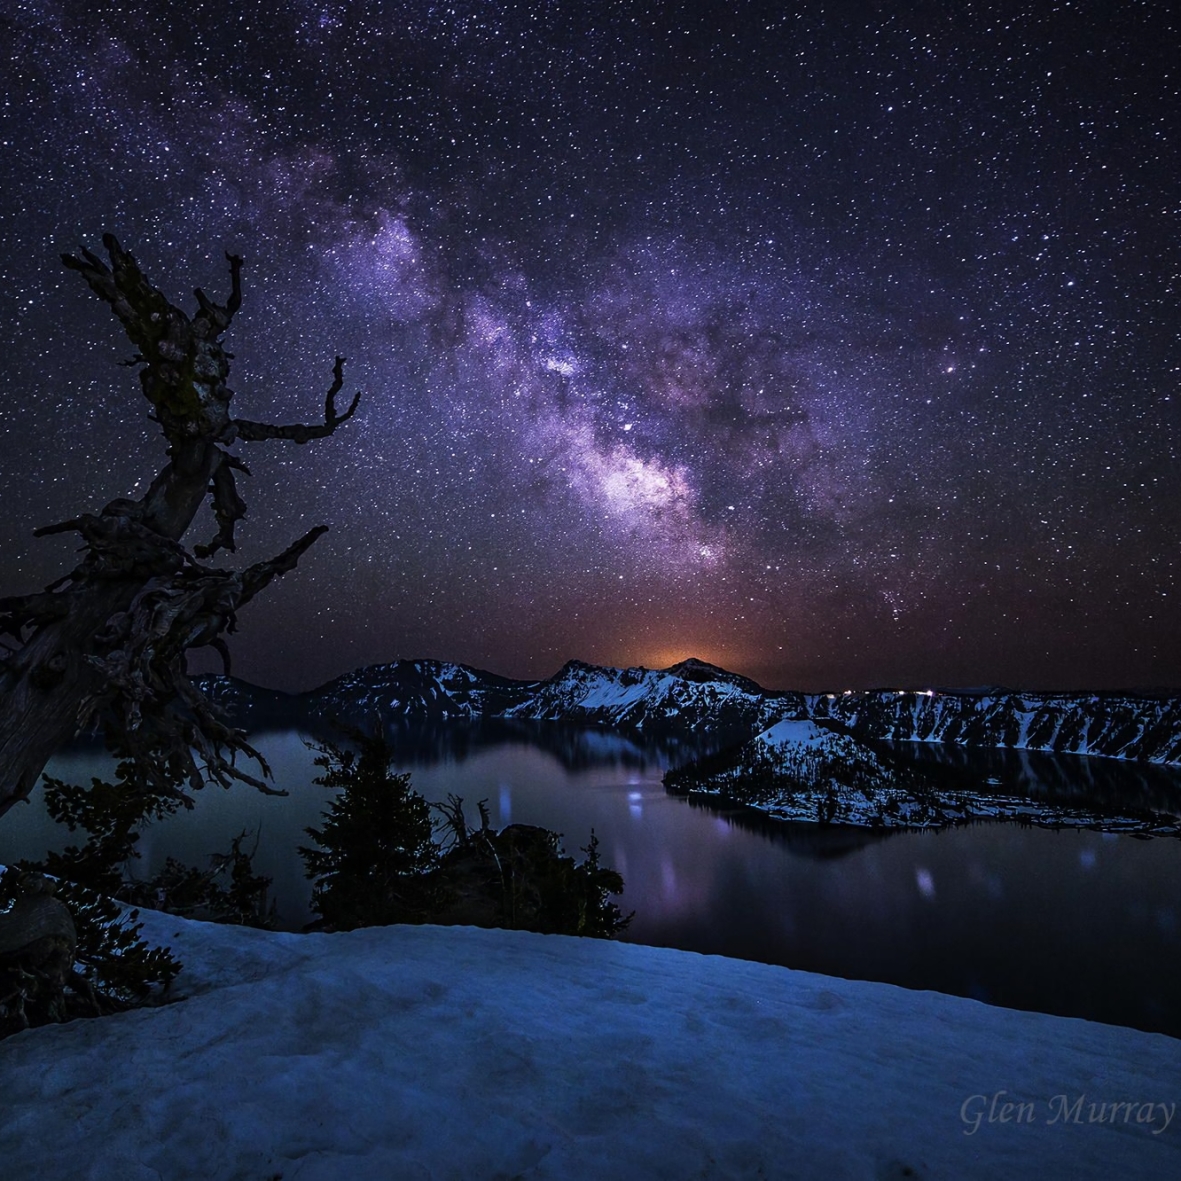 Milky Way over Winter lake by Glen Murray